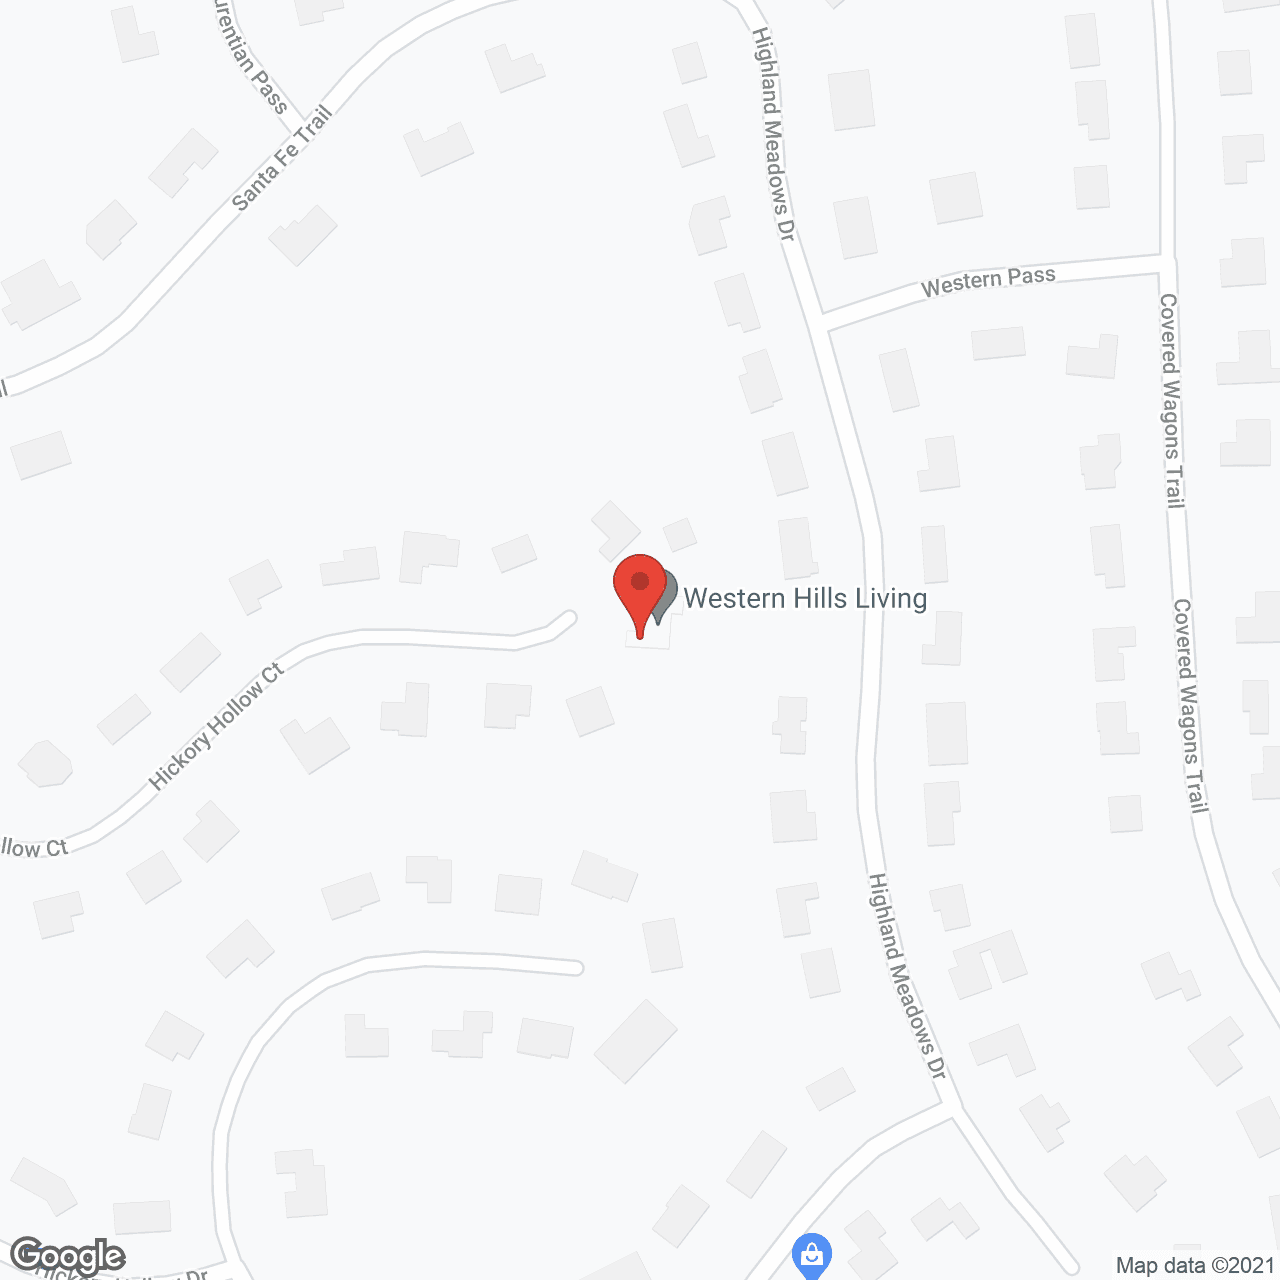 Western Hills Living in google map